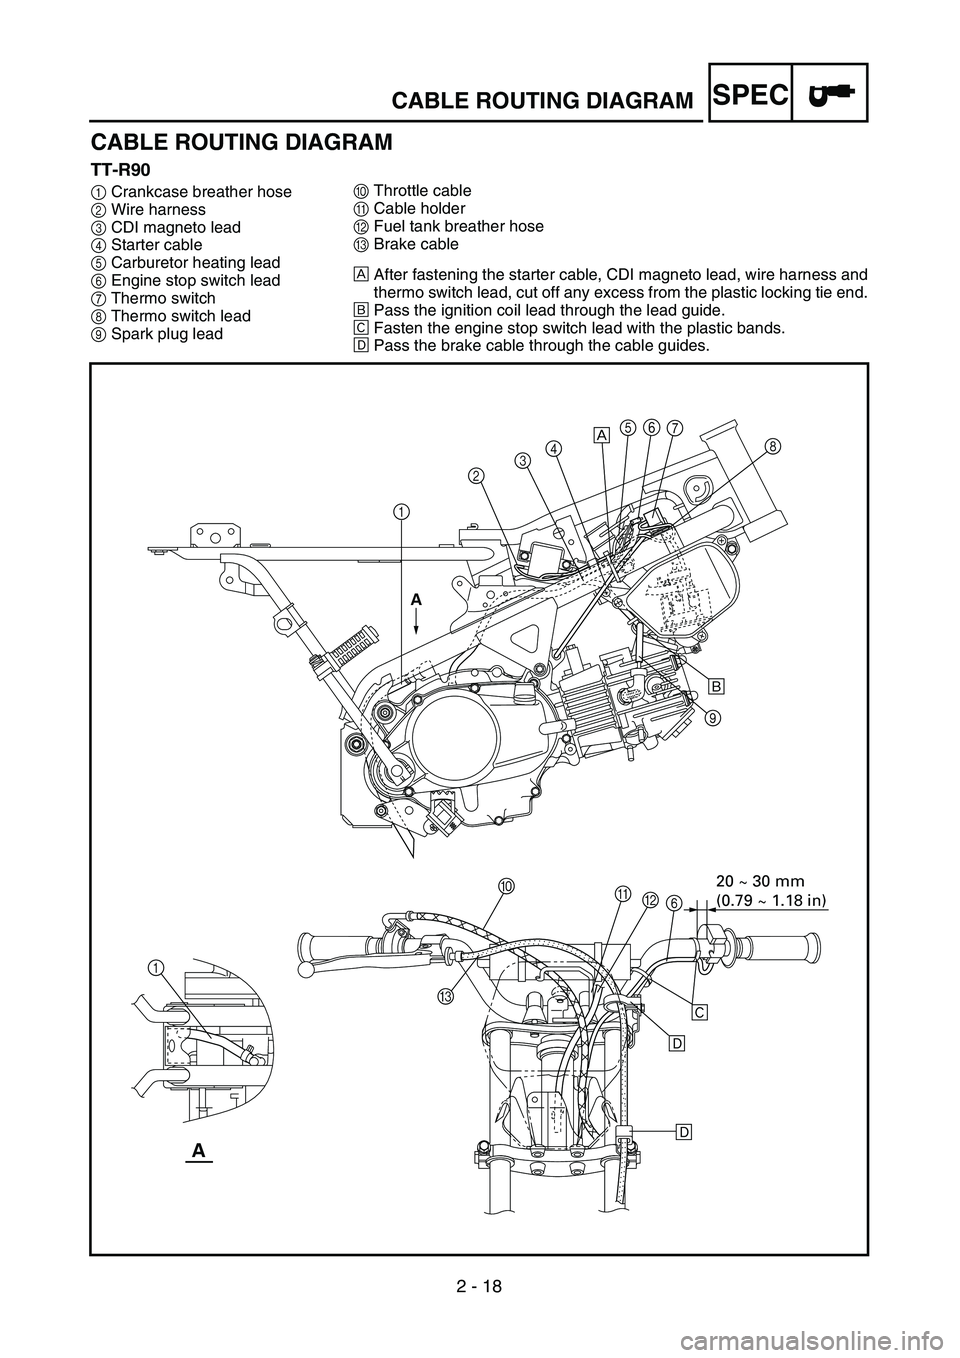 YAMAHA TTR90 2005  Betriebsanleitungen (in German) 2 - 18
SPEC
CABLE ROUTING DIAGRAM
TT-R90
1Crankcase breather hose
2Wire harness
3CDI magneto lead
4Starter cable
5Carburetor heating lead
6Engine stop switch lead
7Thermo switch
8Thermo switch lead
9S